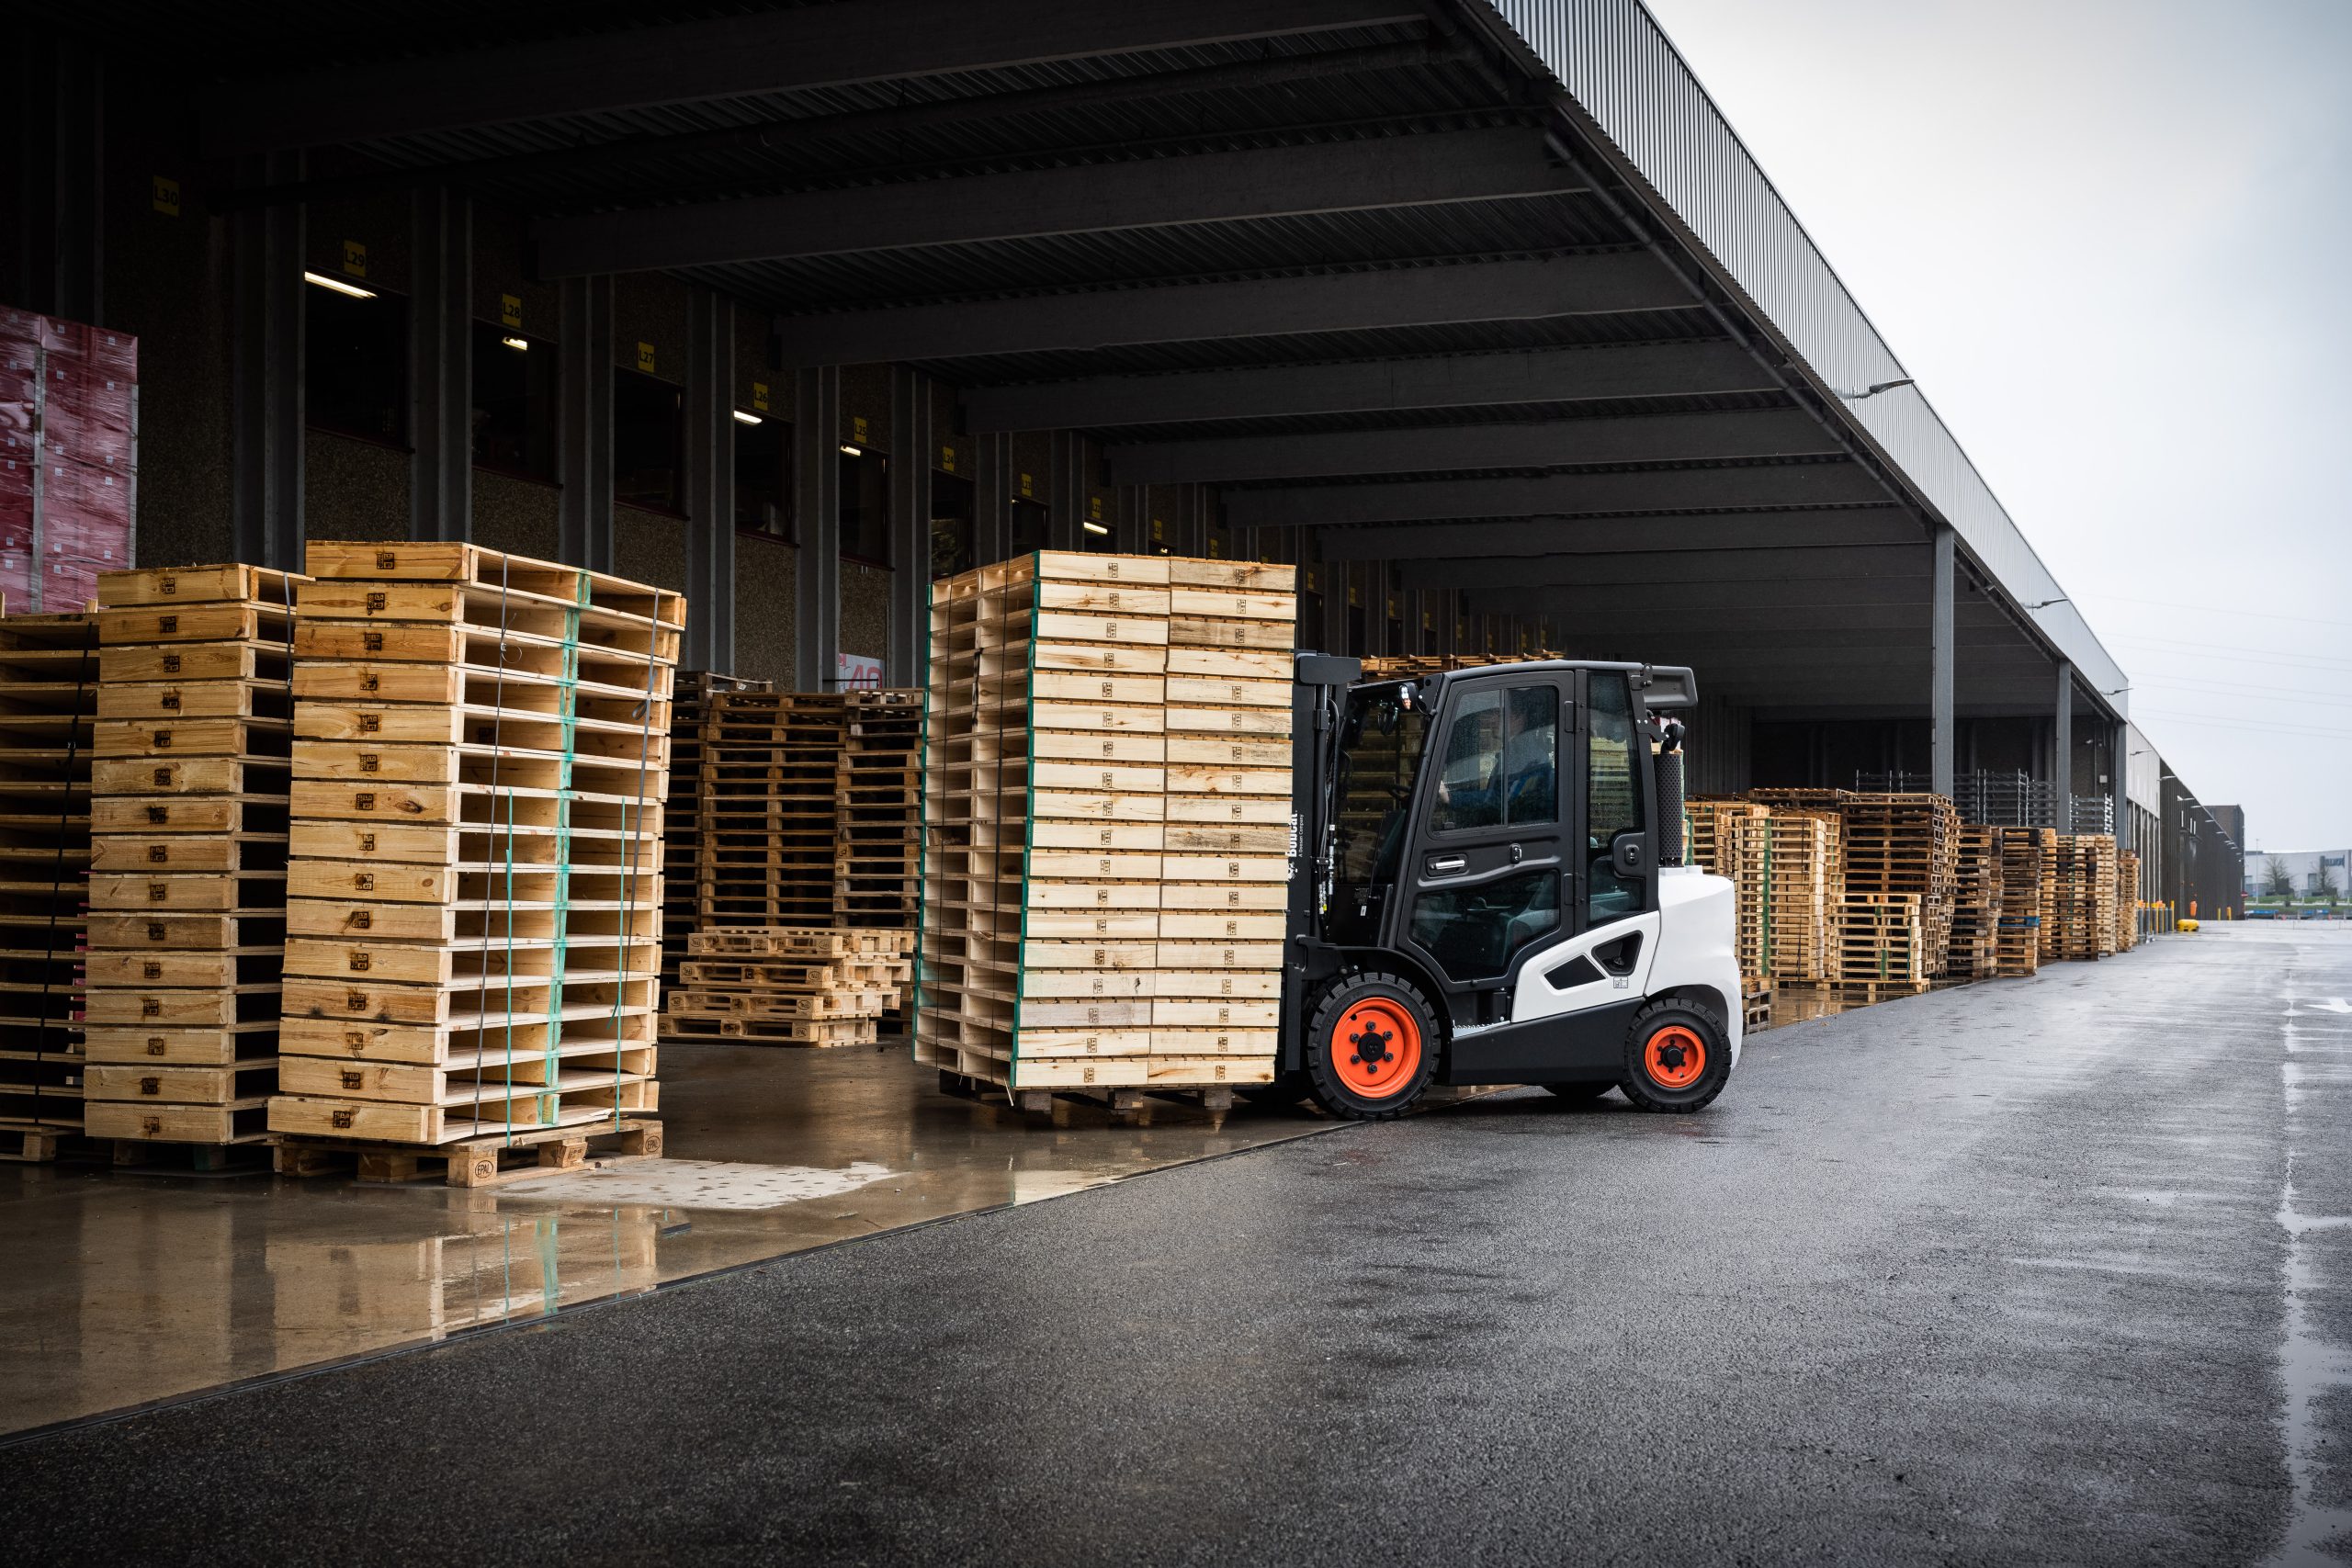 Doosan Bobcat Diesel Counterbalance Forklift Truck lifting a stack of pallets in a warehouse